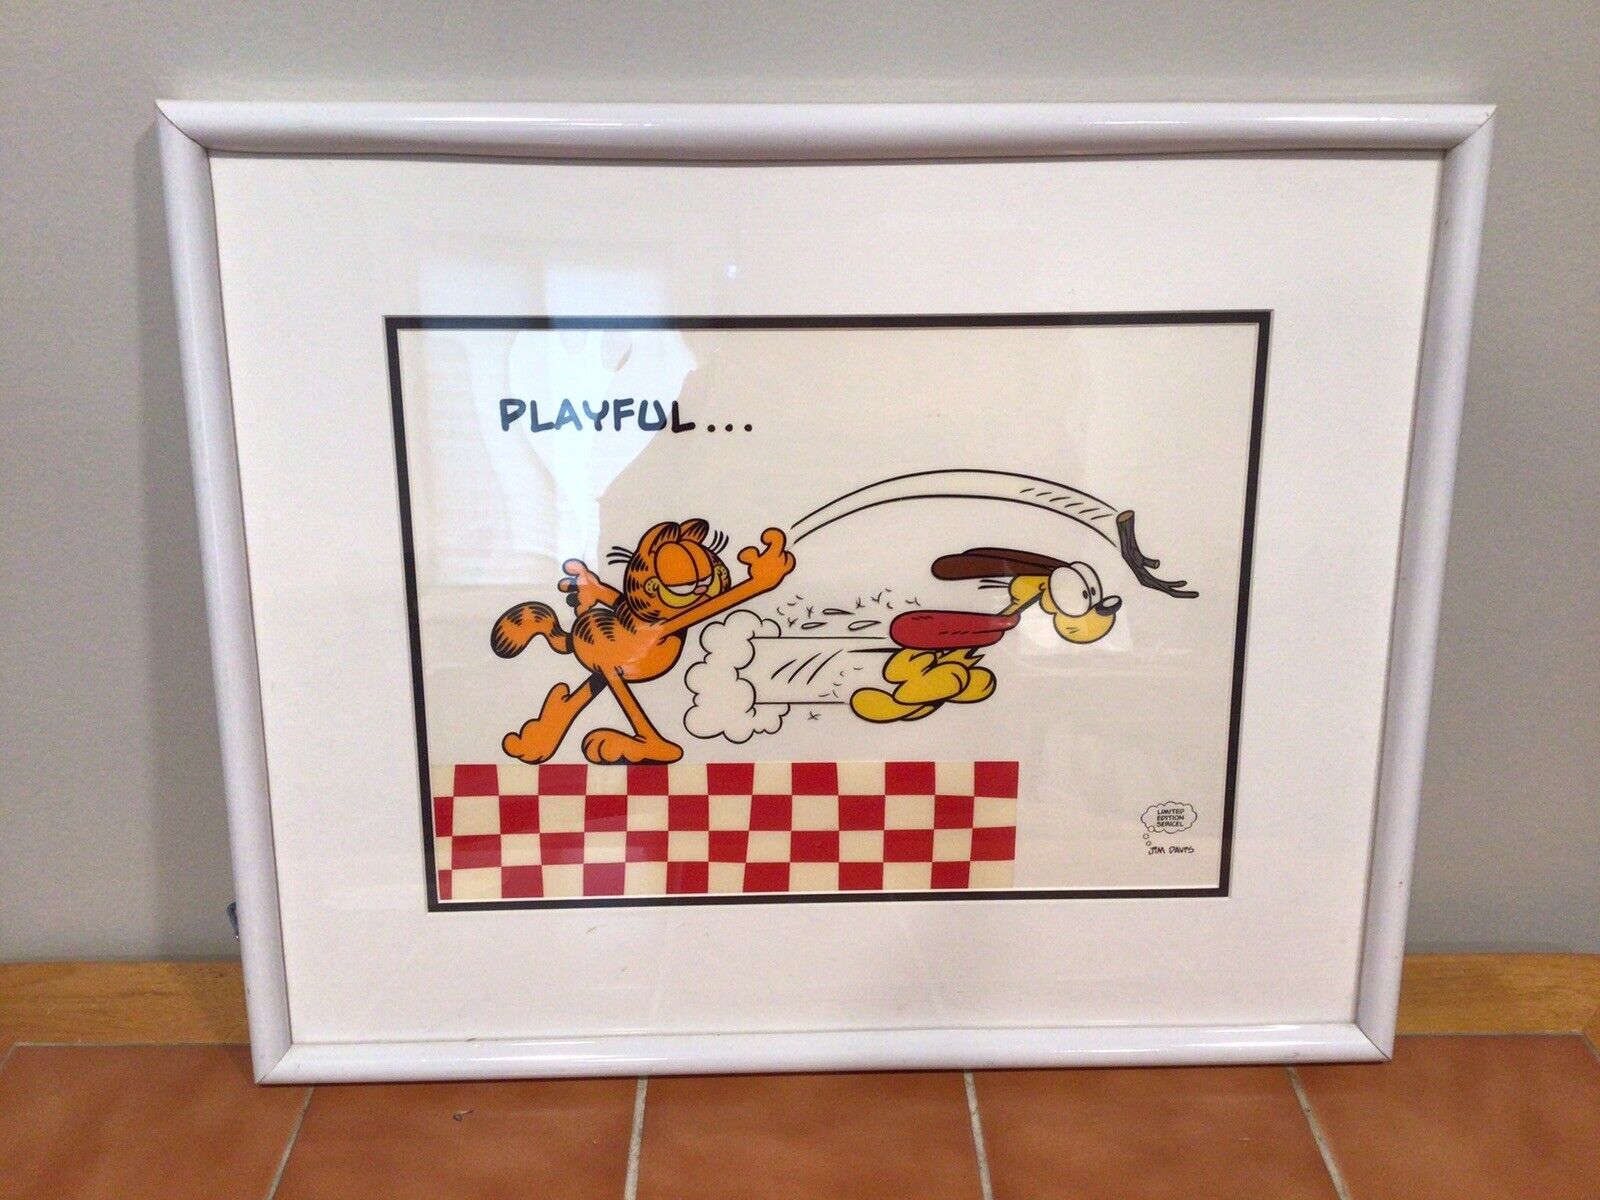 Garfield & Odie Limited Edition Serigraph Cel “Playful”